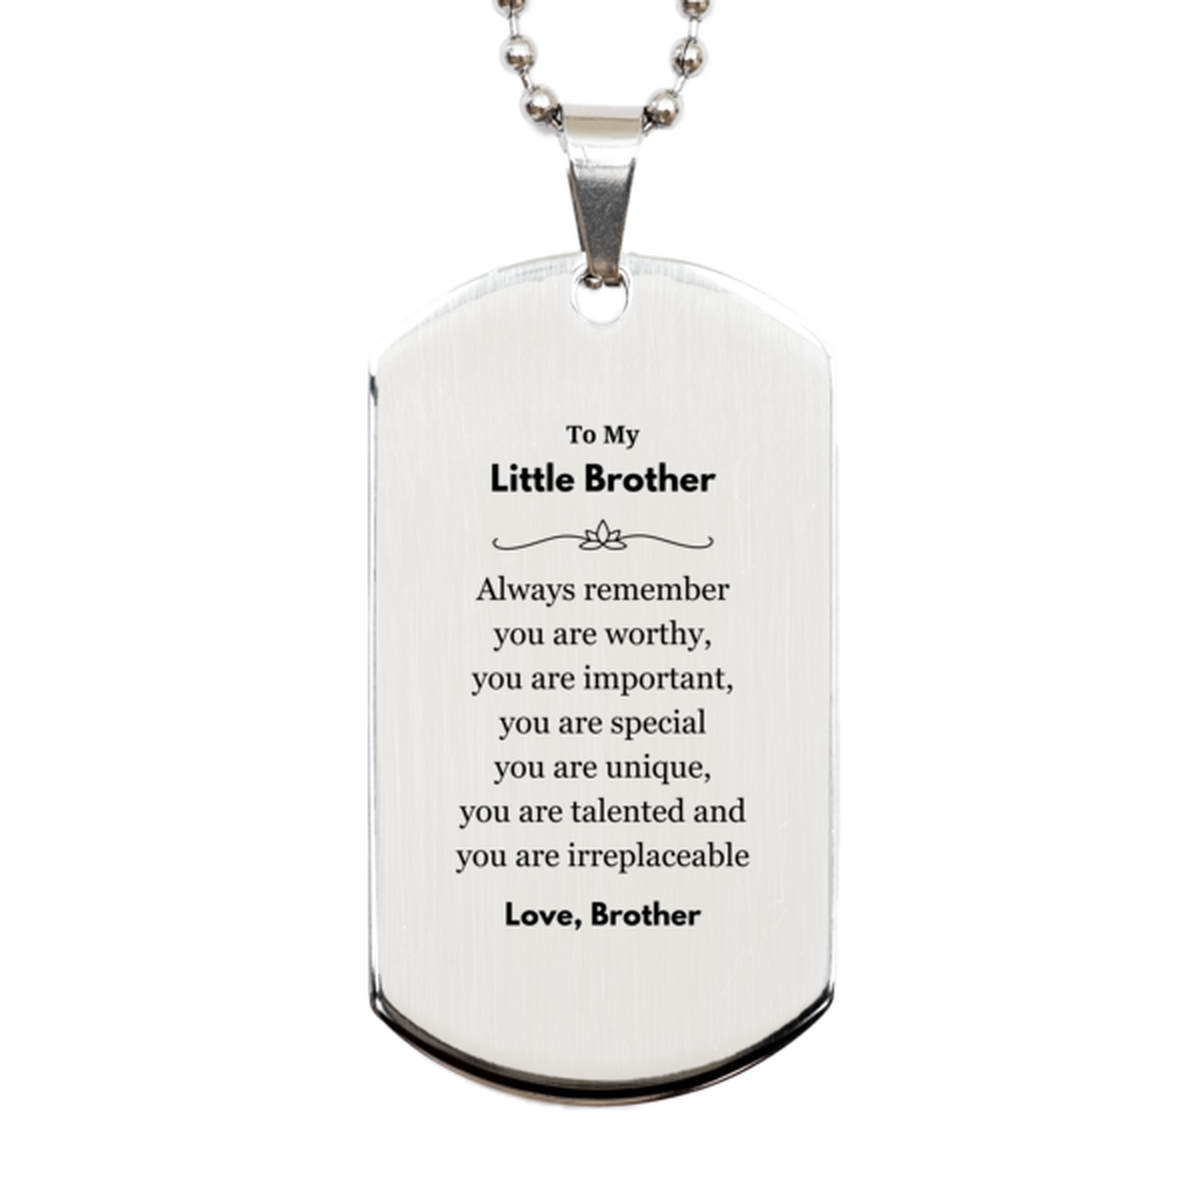 Little Brother Birthday Gifts from Brother, Inspirational Silver Dog Tag for Little Brother Christmas Graduation Gifts for Little Brother Always remember you are worthy, you are important. Love, Brother